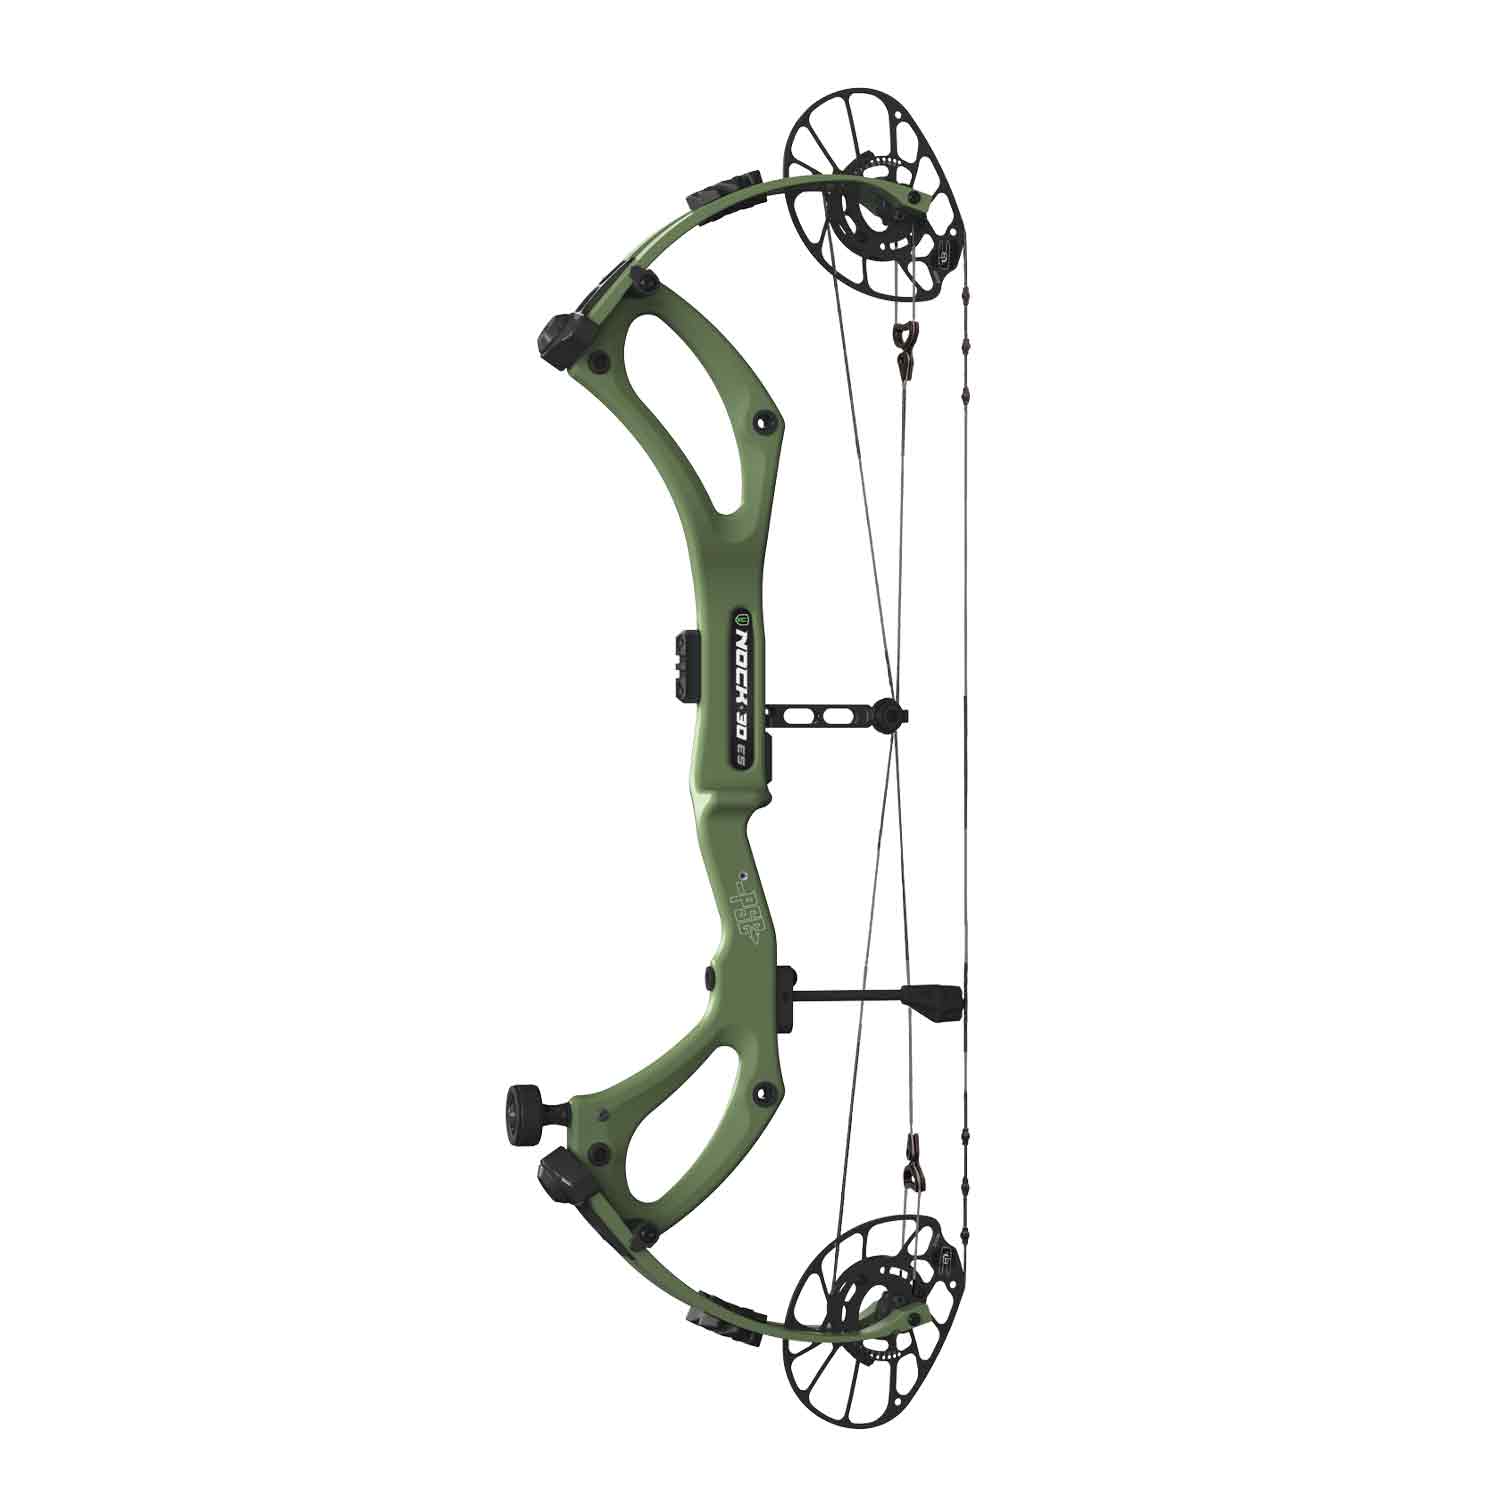 PSE Nock 30 ES Carbon Compound Hunting Bow